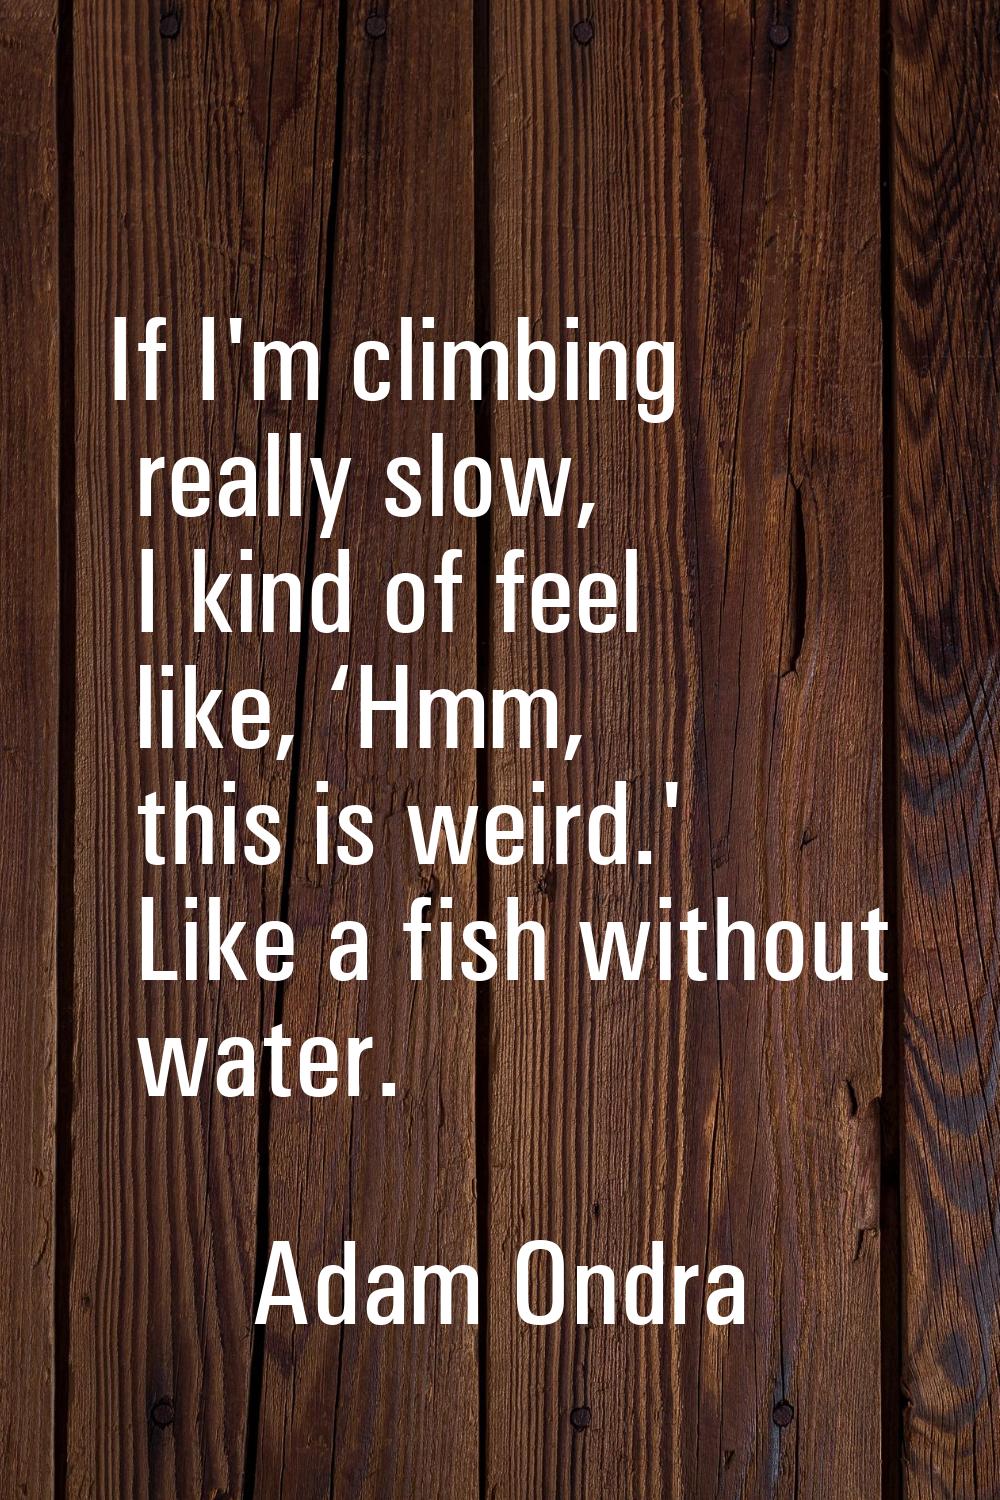 If I'm climbing really slow, I kind of feel like, ‘Hmm, this is weird.' Like a fish without water.